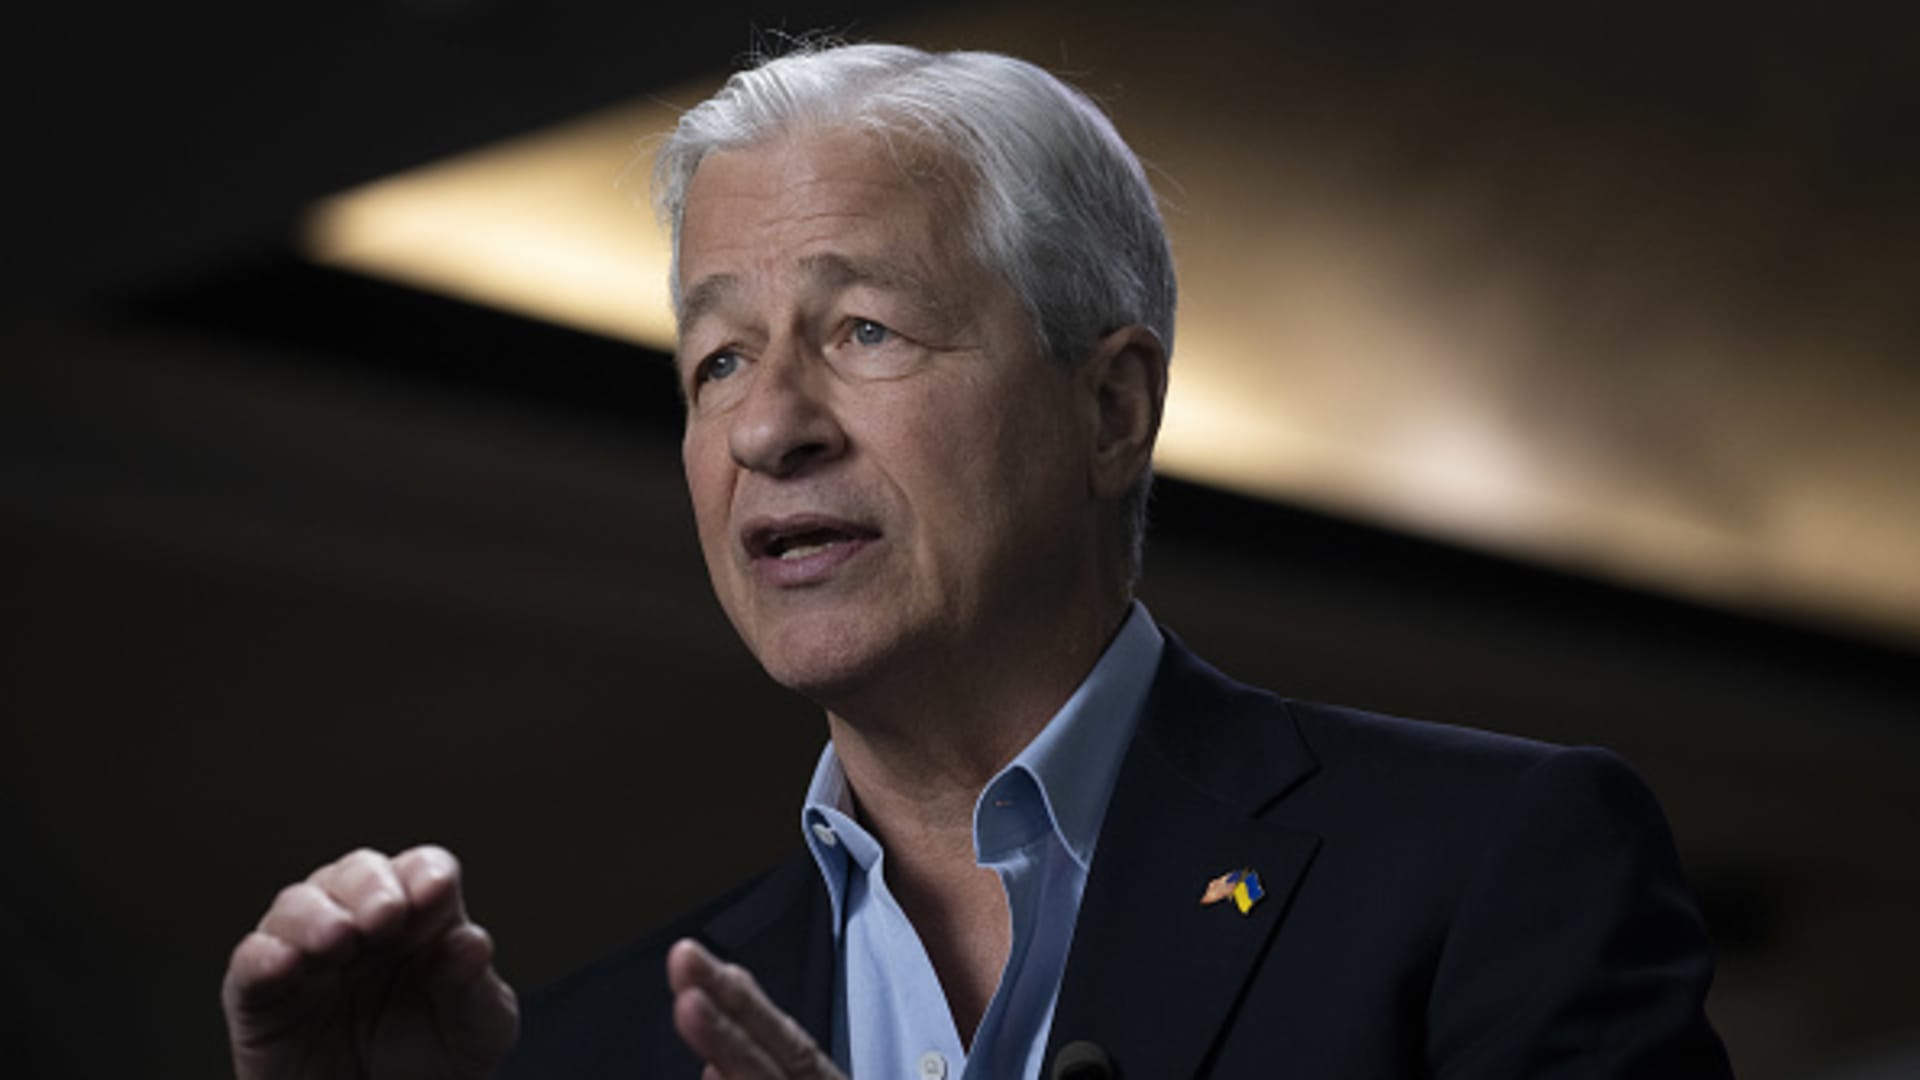 Jamie Dimon is being deposed over JPMorgan Chase role in Epstein ...